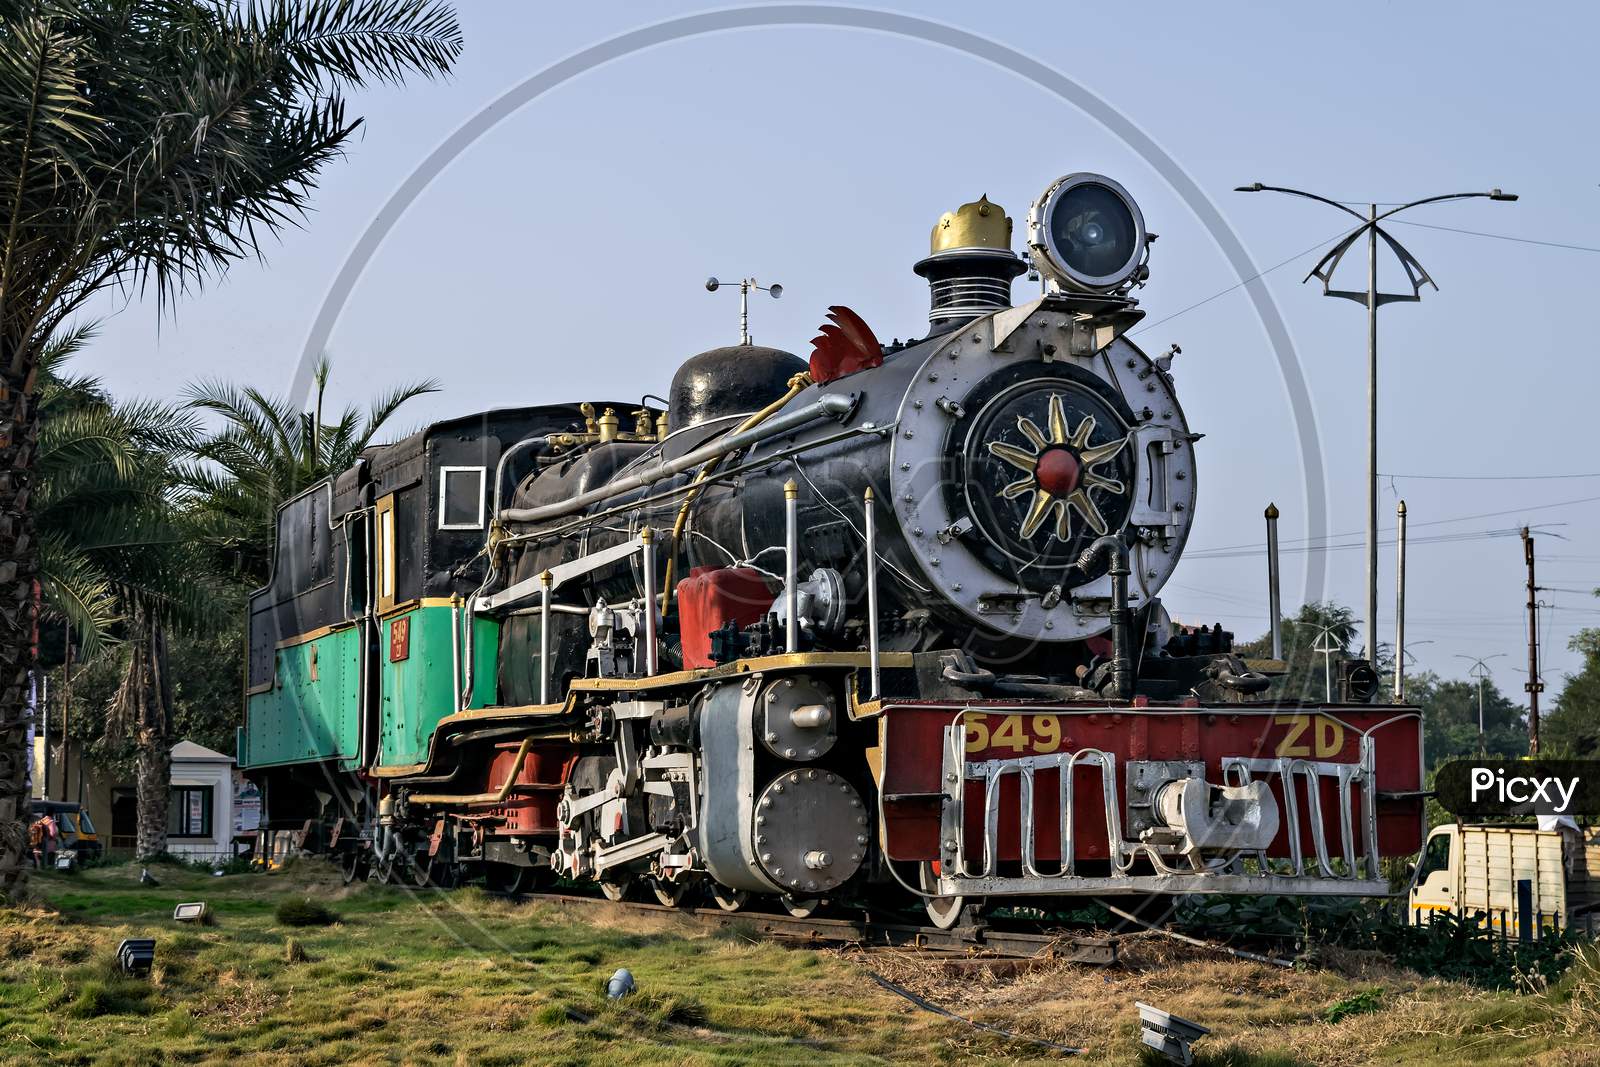 Solapur,Maharashtra,India-December 23Rd,2019: Old Narrow Gauge Steam Locomotive, Zd-549 Preserved By Displaying In Front Of Solapur Railway Station.